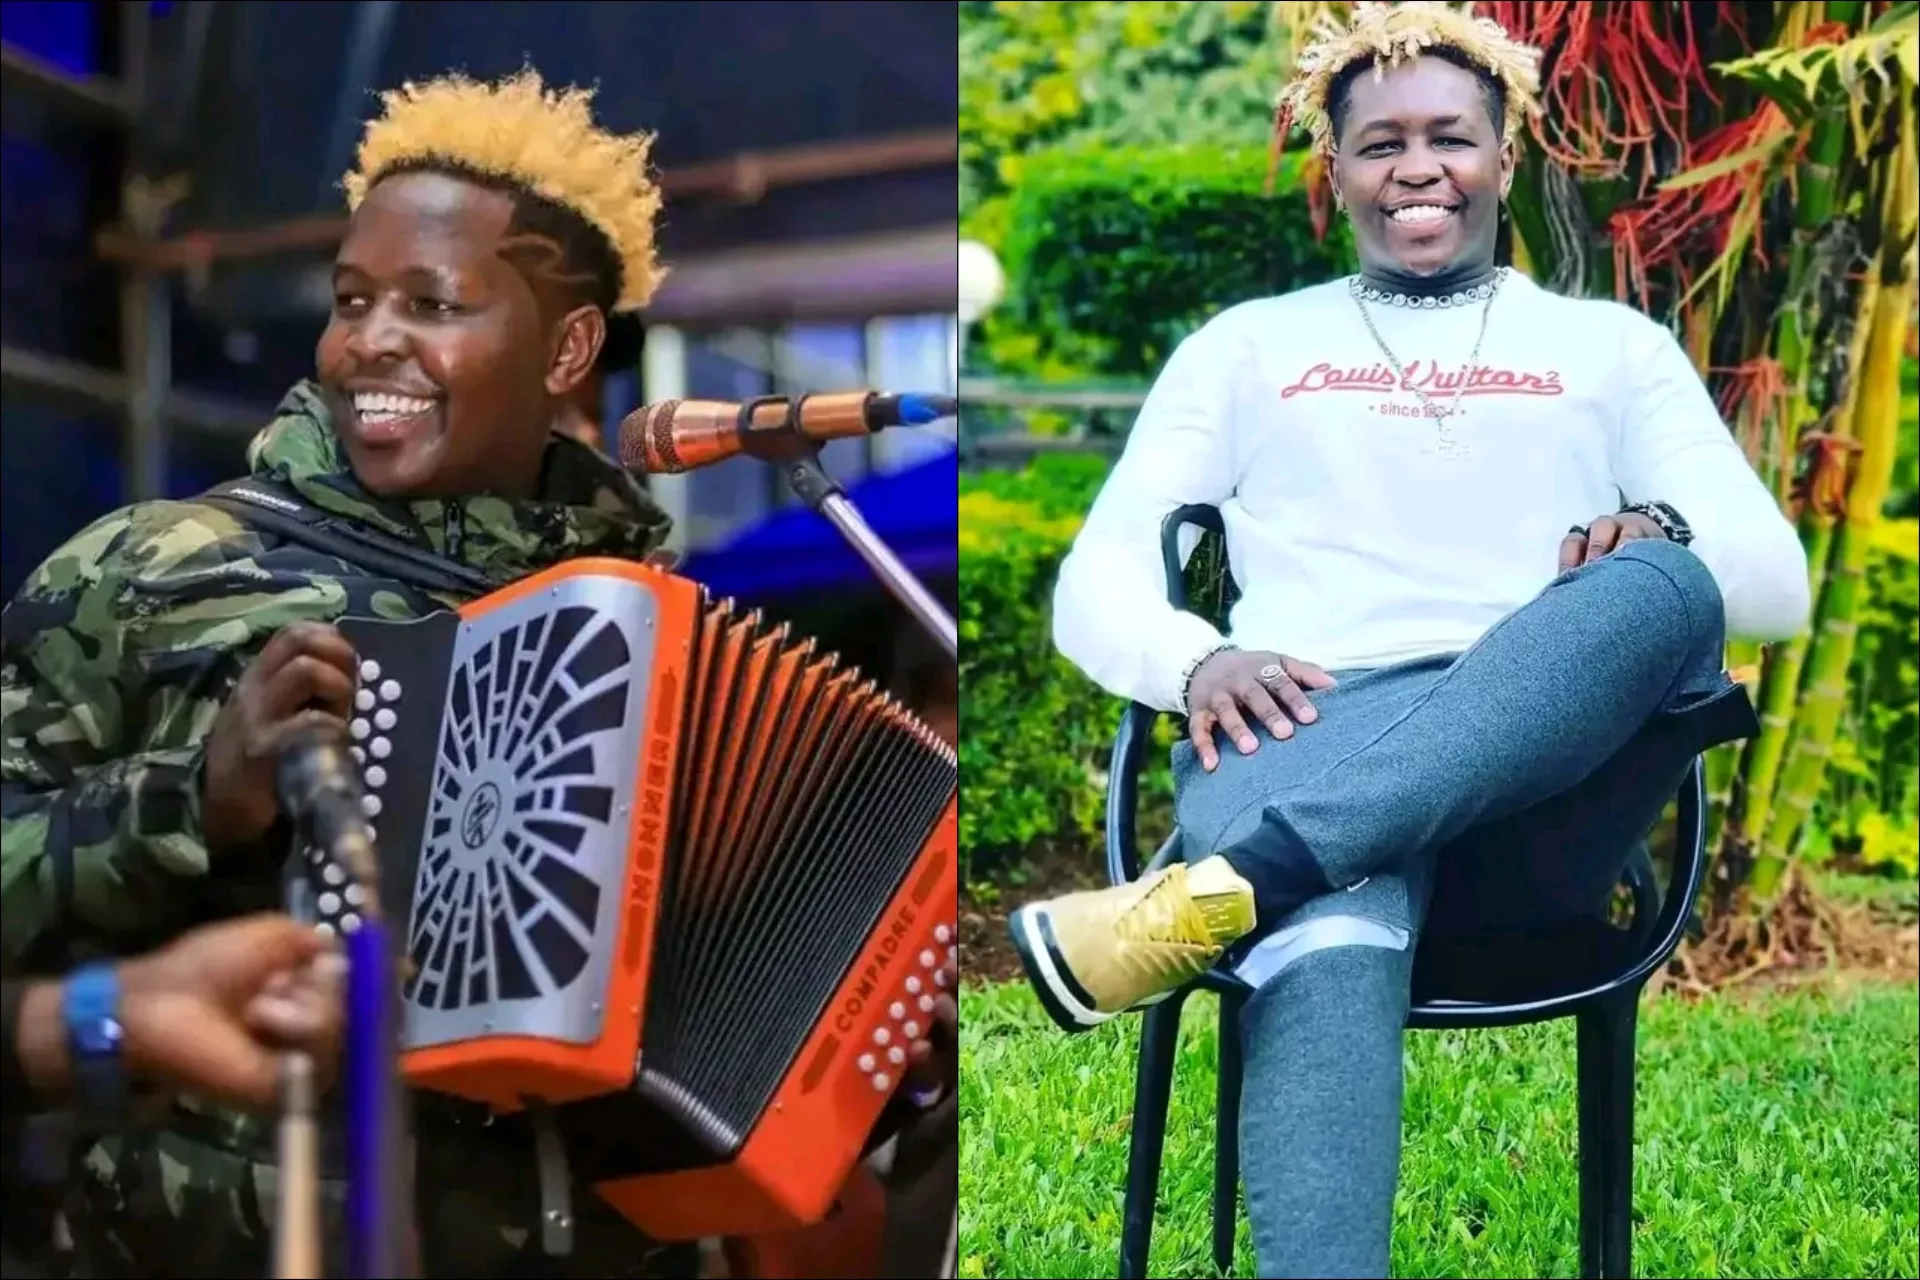 For the better part of this week, Lawrence Njuguna, popularly known as DJ Fatxo has been trending over the mysterious death of Geoffrey Mwathi. Mwathi is alleged to have died of suicide by jumping from the 10th floor of Redwood Apartments . It has however emerged that Mwathi was with DJ Fatxo moments before death. DJ Fatxo is a Professional DJ, and a Mugithi singer. He rose to fame in 2020 when he released a debut hit, Ndi Mang'a. Besides music, DJ Fatxo is an entrepreneur and a businessman. He is the founder and CEO of Dope Unit Entertainment among many other businesses. So who is DJ FATXO? 1. His real name is Lawrence Njuguna 2. He was born in Nyandarua County 3. His father is called Wagura and his mum is named Njoki 4.He grew up in Kinangop 5. He went to many Primary schools among them; Bridges view, Kingapo pride, Morning Starlight Academy, and others he does not name. 6. He is the only child in their family 7. He is a professional Deejay and Mugithi singer 8. He trained DJ in the System Unit in 2015. 9. He started as a club DJ 10.He runs a DJ school and teaches dancing. 11. DJ Fatxo began music career in 2020. He sstarted by recording two songs. The singer rose to fame after releasing his debut hit Ndi Mang'a. The song gained ovee 4.4M views on YouTube. 12. He majorly composes songs that glorify Alcohol, which he defends as his style of music. 13. He is a busniessman and an entrepreneur dealing with merchandise branding, document editing, etc 14. He gifted his parents a house in 2021 as a Valentines gift. 15. He was rumoured to be in a relationship with former Murang'a Women Representative Sabina Chege